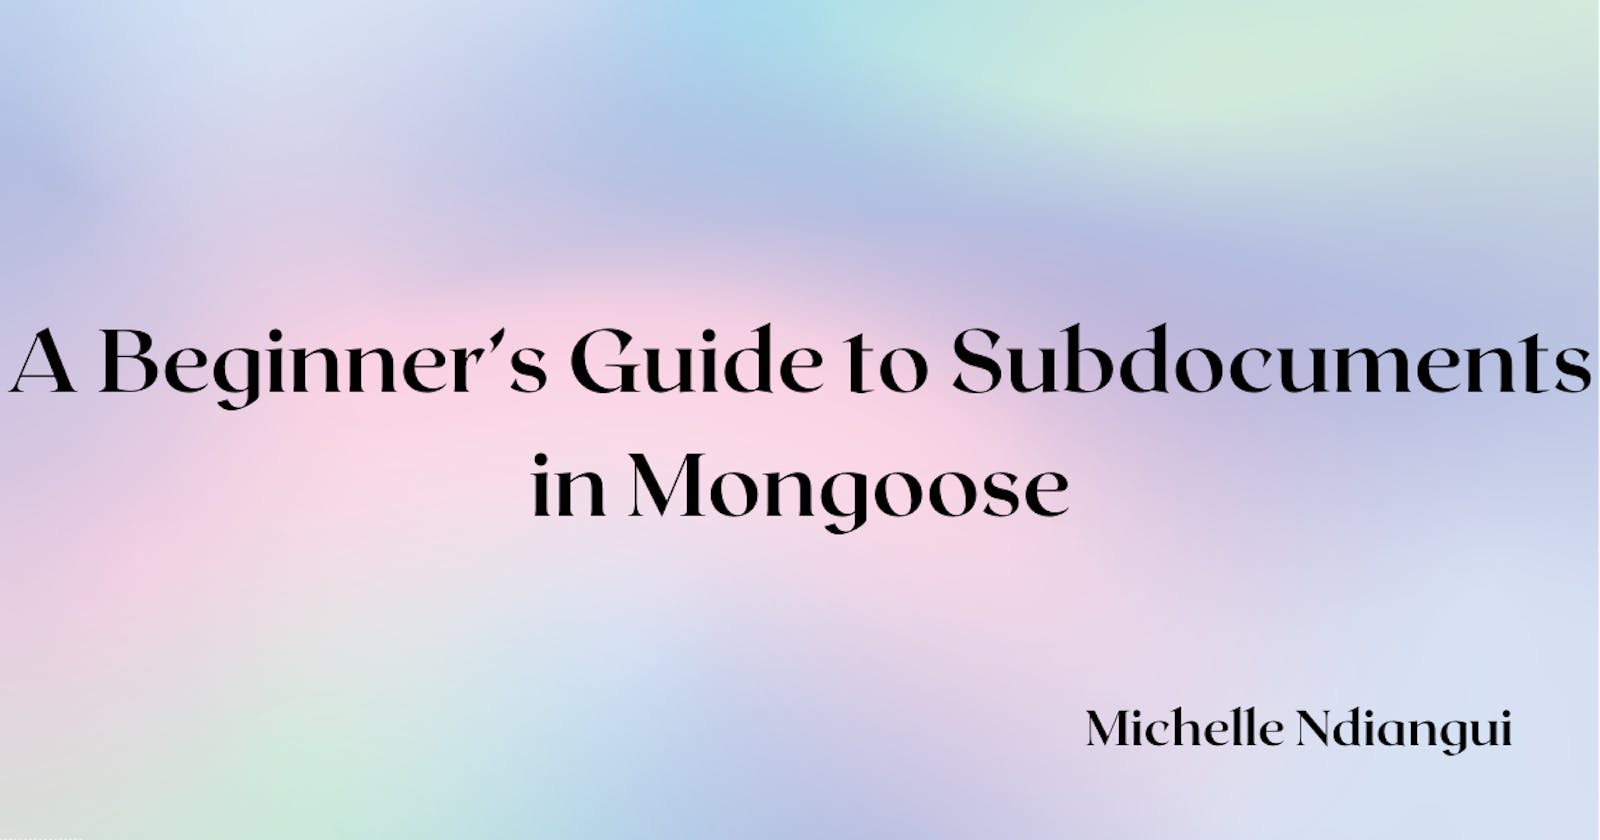 A Beginner's Guide to Subdocuments in Mongoose